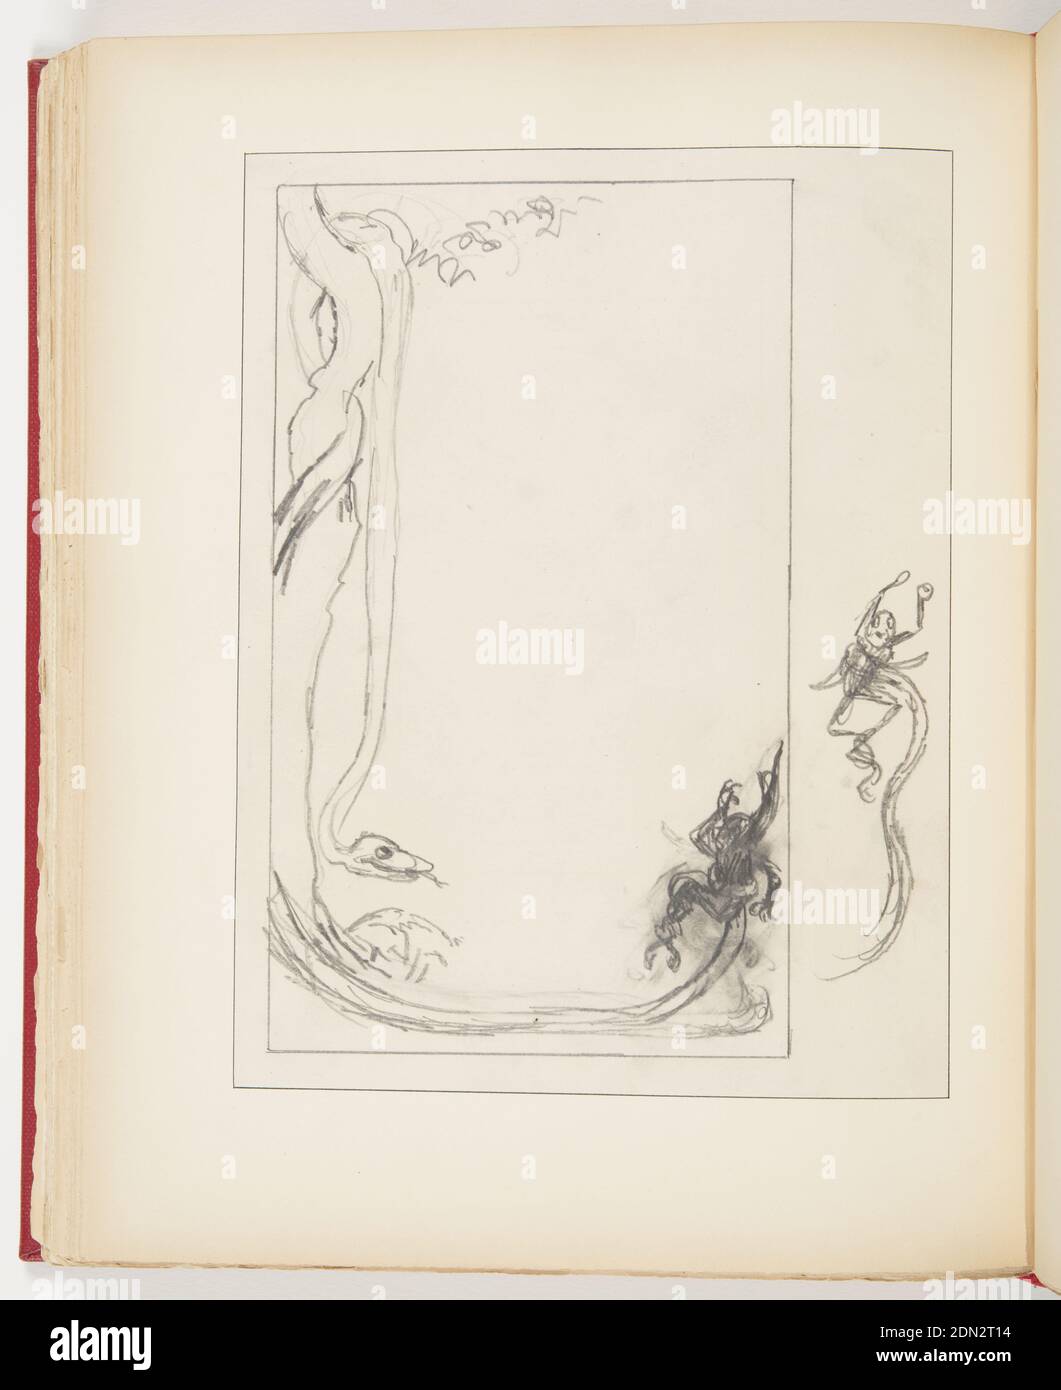 Sketch for “The Chimpanzee and the Boa Constrictor” in “Fables, Out of This World”, Graphite on paper, Left, tree with large snake wrapped around the trunk of the tree, head at the bottom of the trunk, profile facing right. Center left, tail of snake wrapped around creature, creature’s back is seen; left, tail of snake wrapped around creature, creature seen from the front., USA, ca. 1877, animals, Ephemera, Ephemera Stock Photo